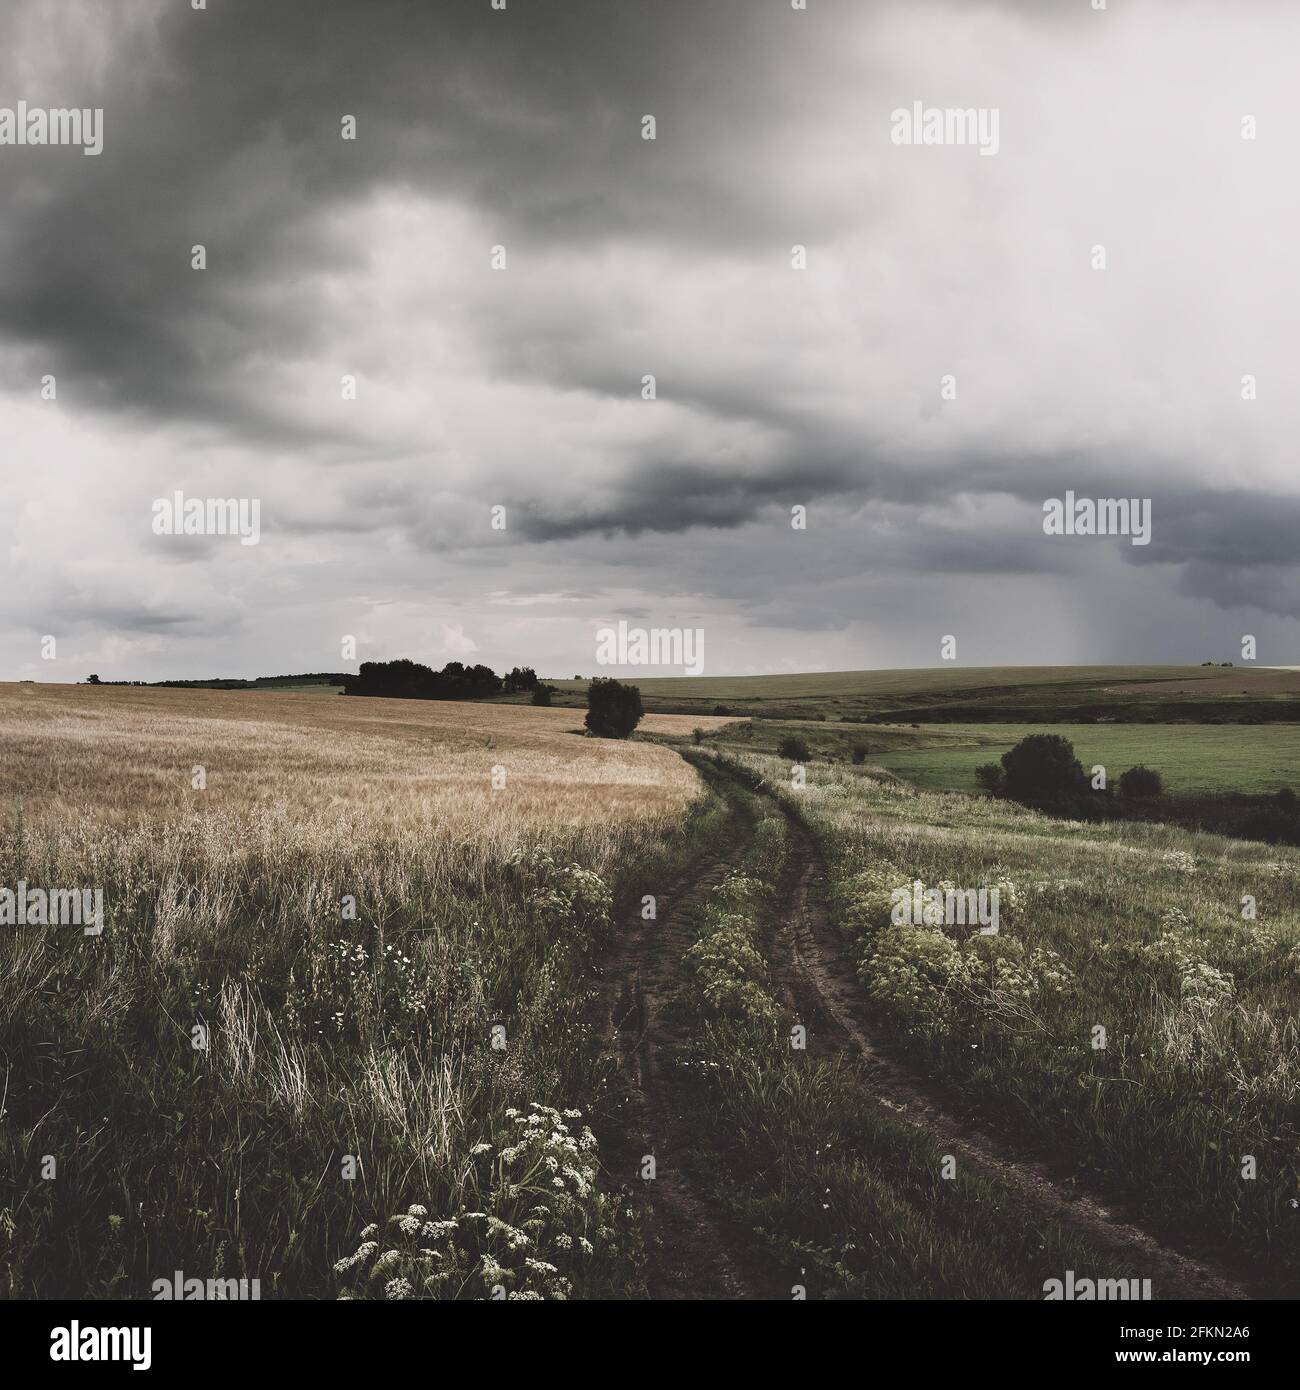 Cloudy summer landscape with dirt country road and fields during rainy day. Stock Photo